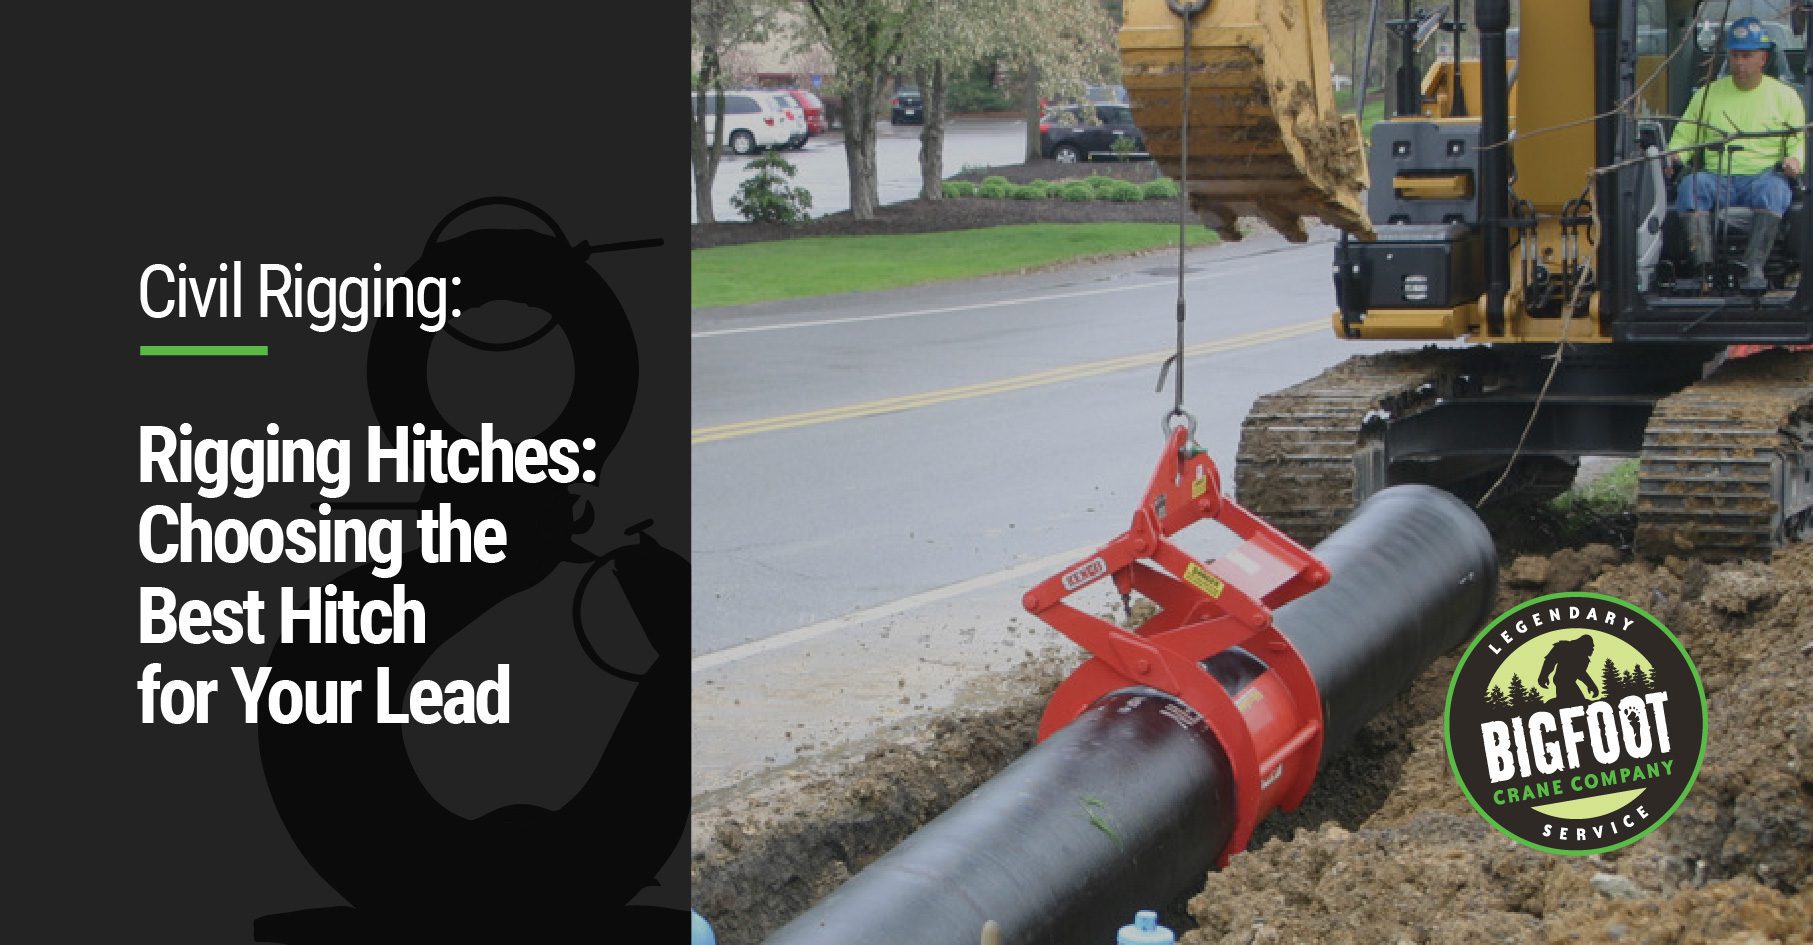 Civil Rigging: Rigging Hitches - Choosing the Best Hitch for Your Lead